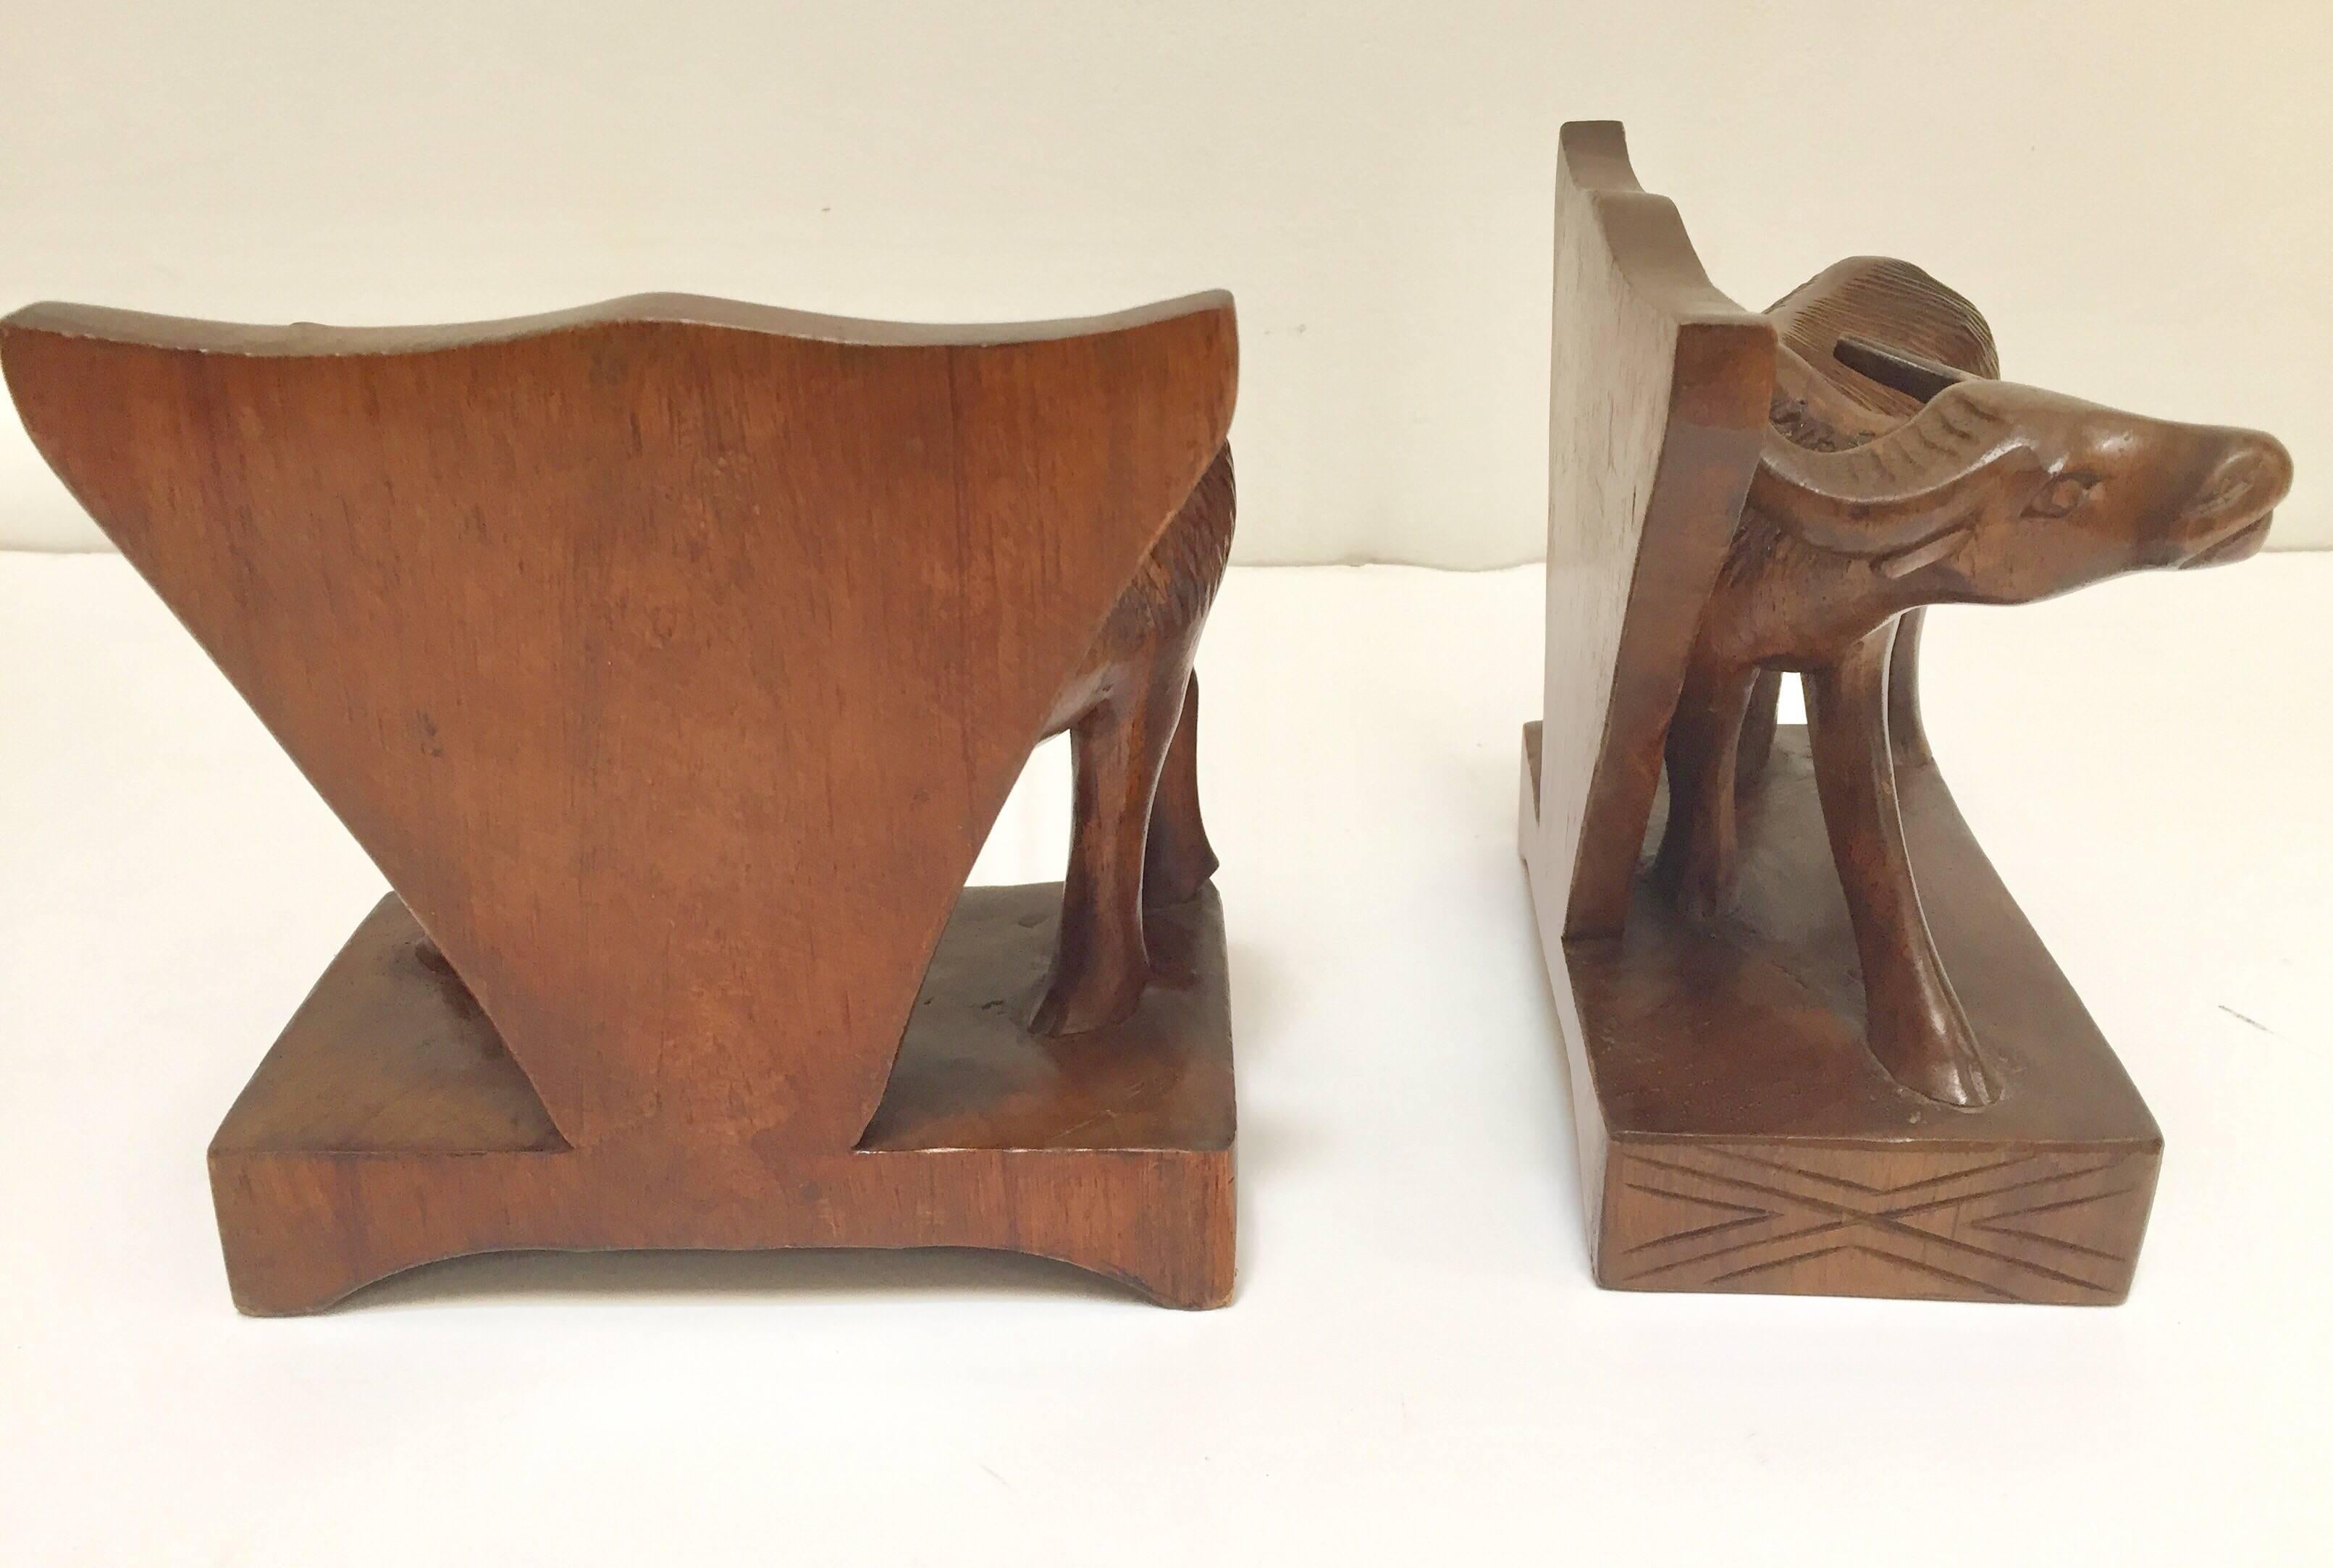 Ivorian Hand-Carved Wooden Sculpture of African Buffalo Bookends